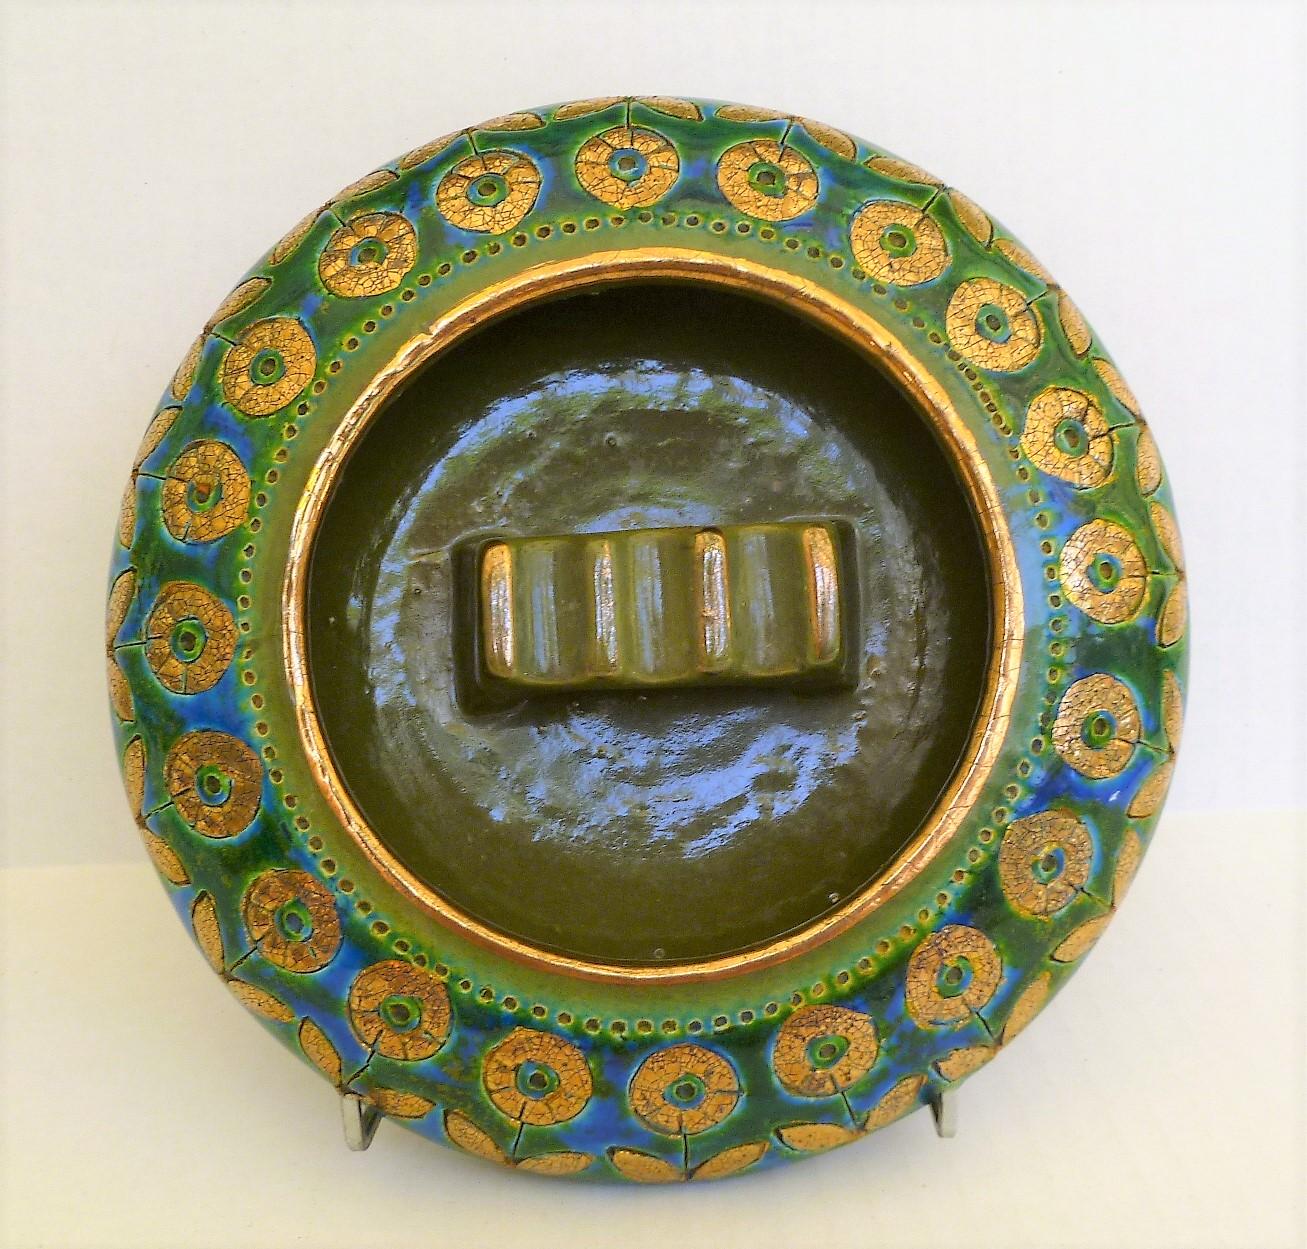 1960s exotic Mid-Century Modern ashtray by Aldo Londi for Rosenthal Netter and produced by Bitossi. Wonderful blue and gold flower sgraffito pattern, named Thai Silk, over an earth green glaze. Large enough to be use as a cigar ashtray. In Very good